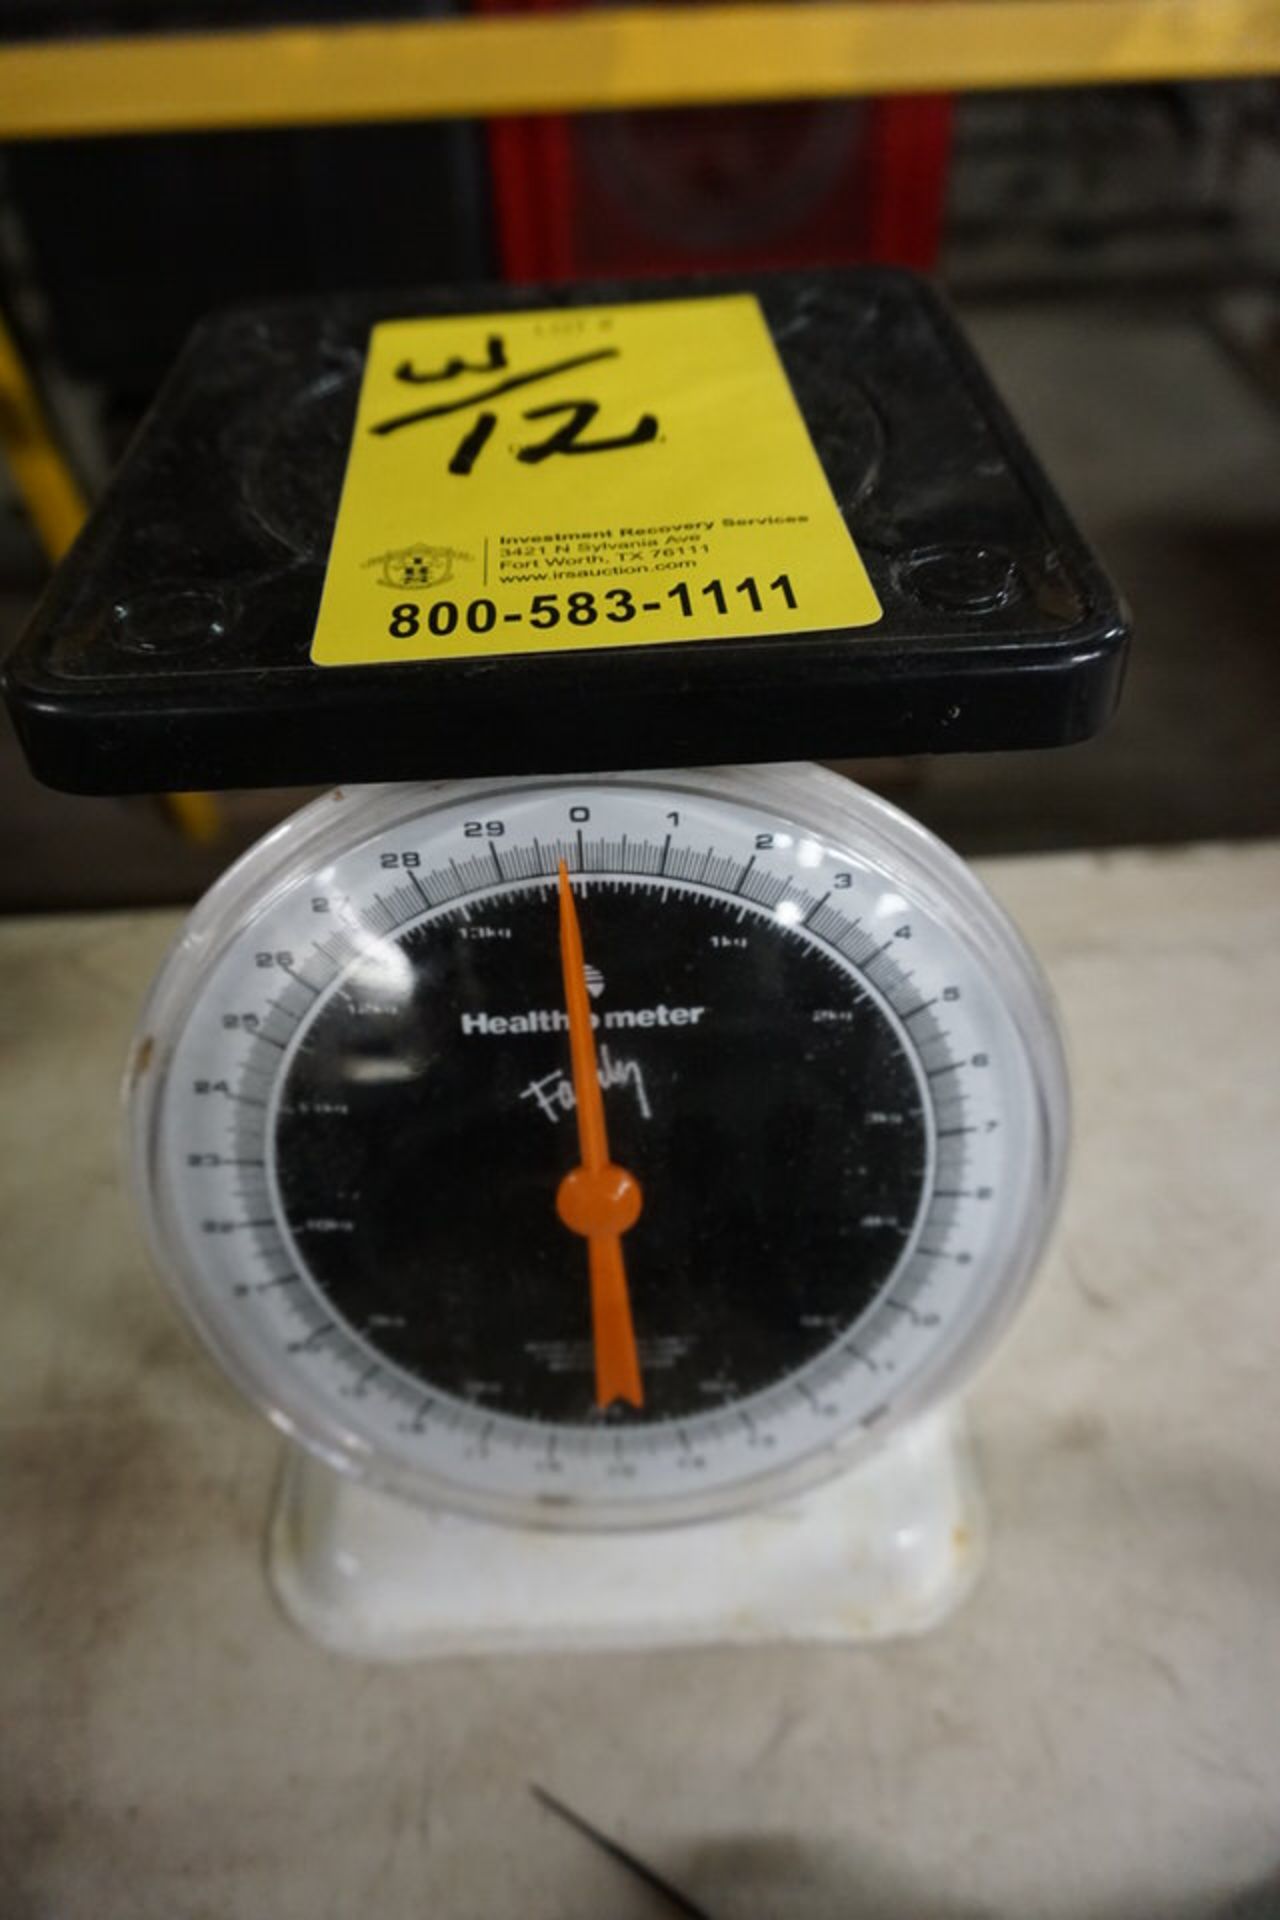 U LINE COUNTING SCAL, MDL: JCE-30K, 60 LB X 0.002 LBS W/ HEALTH METER, 14KG SCALE - Image 4 of 4